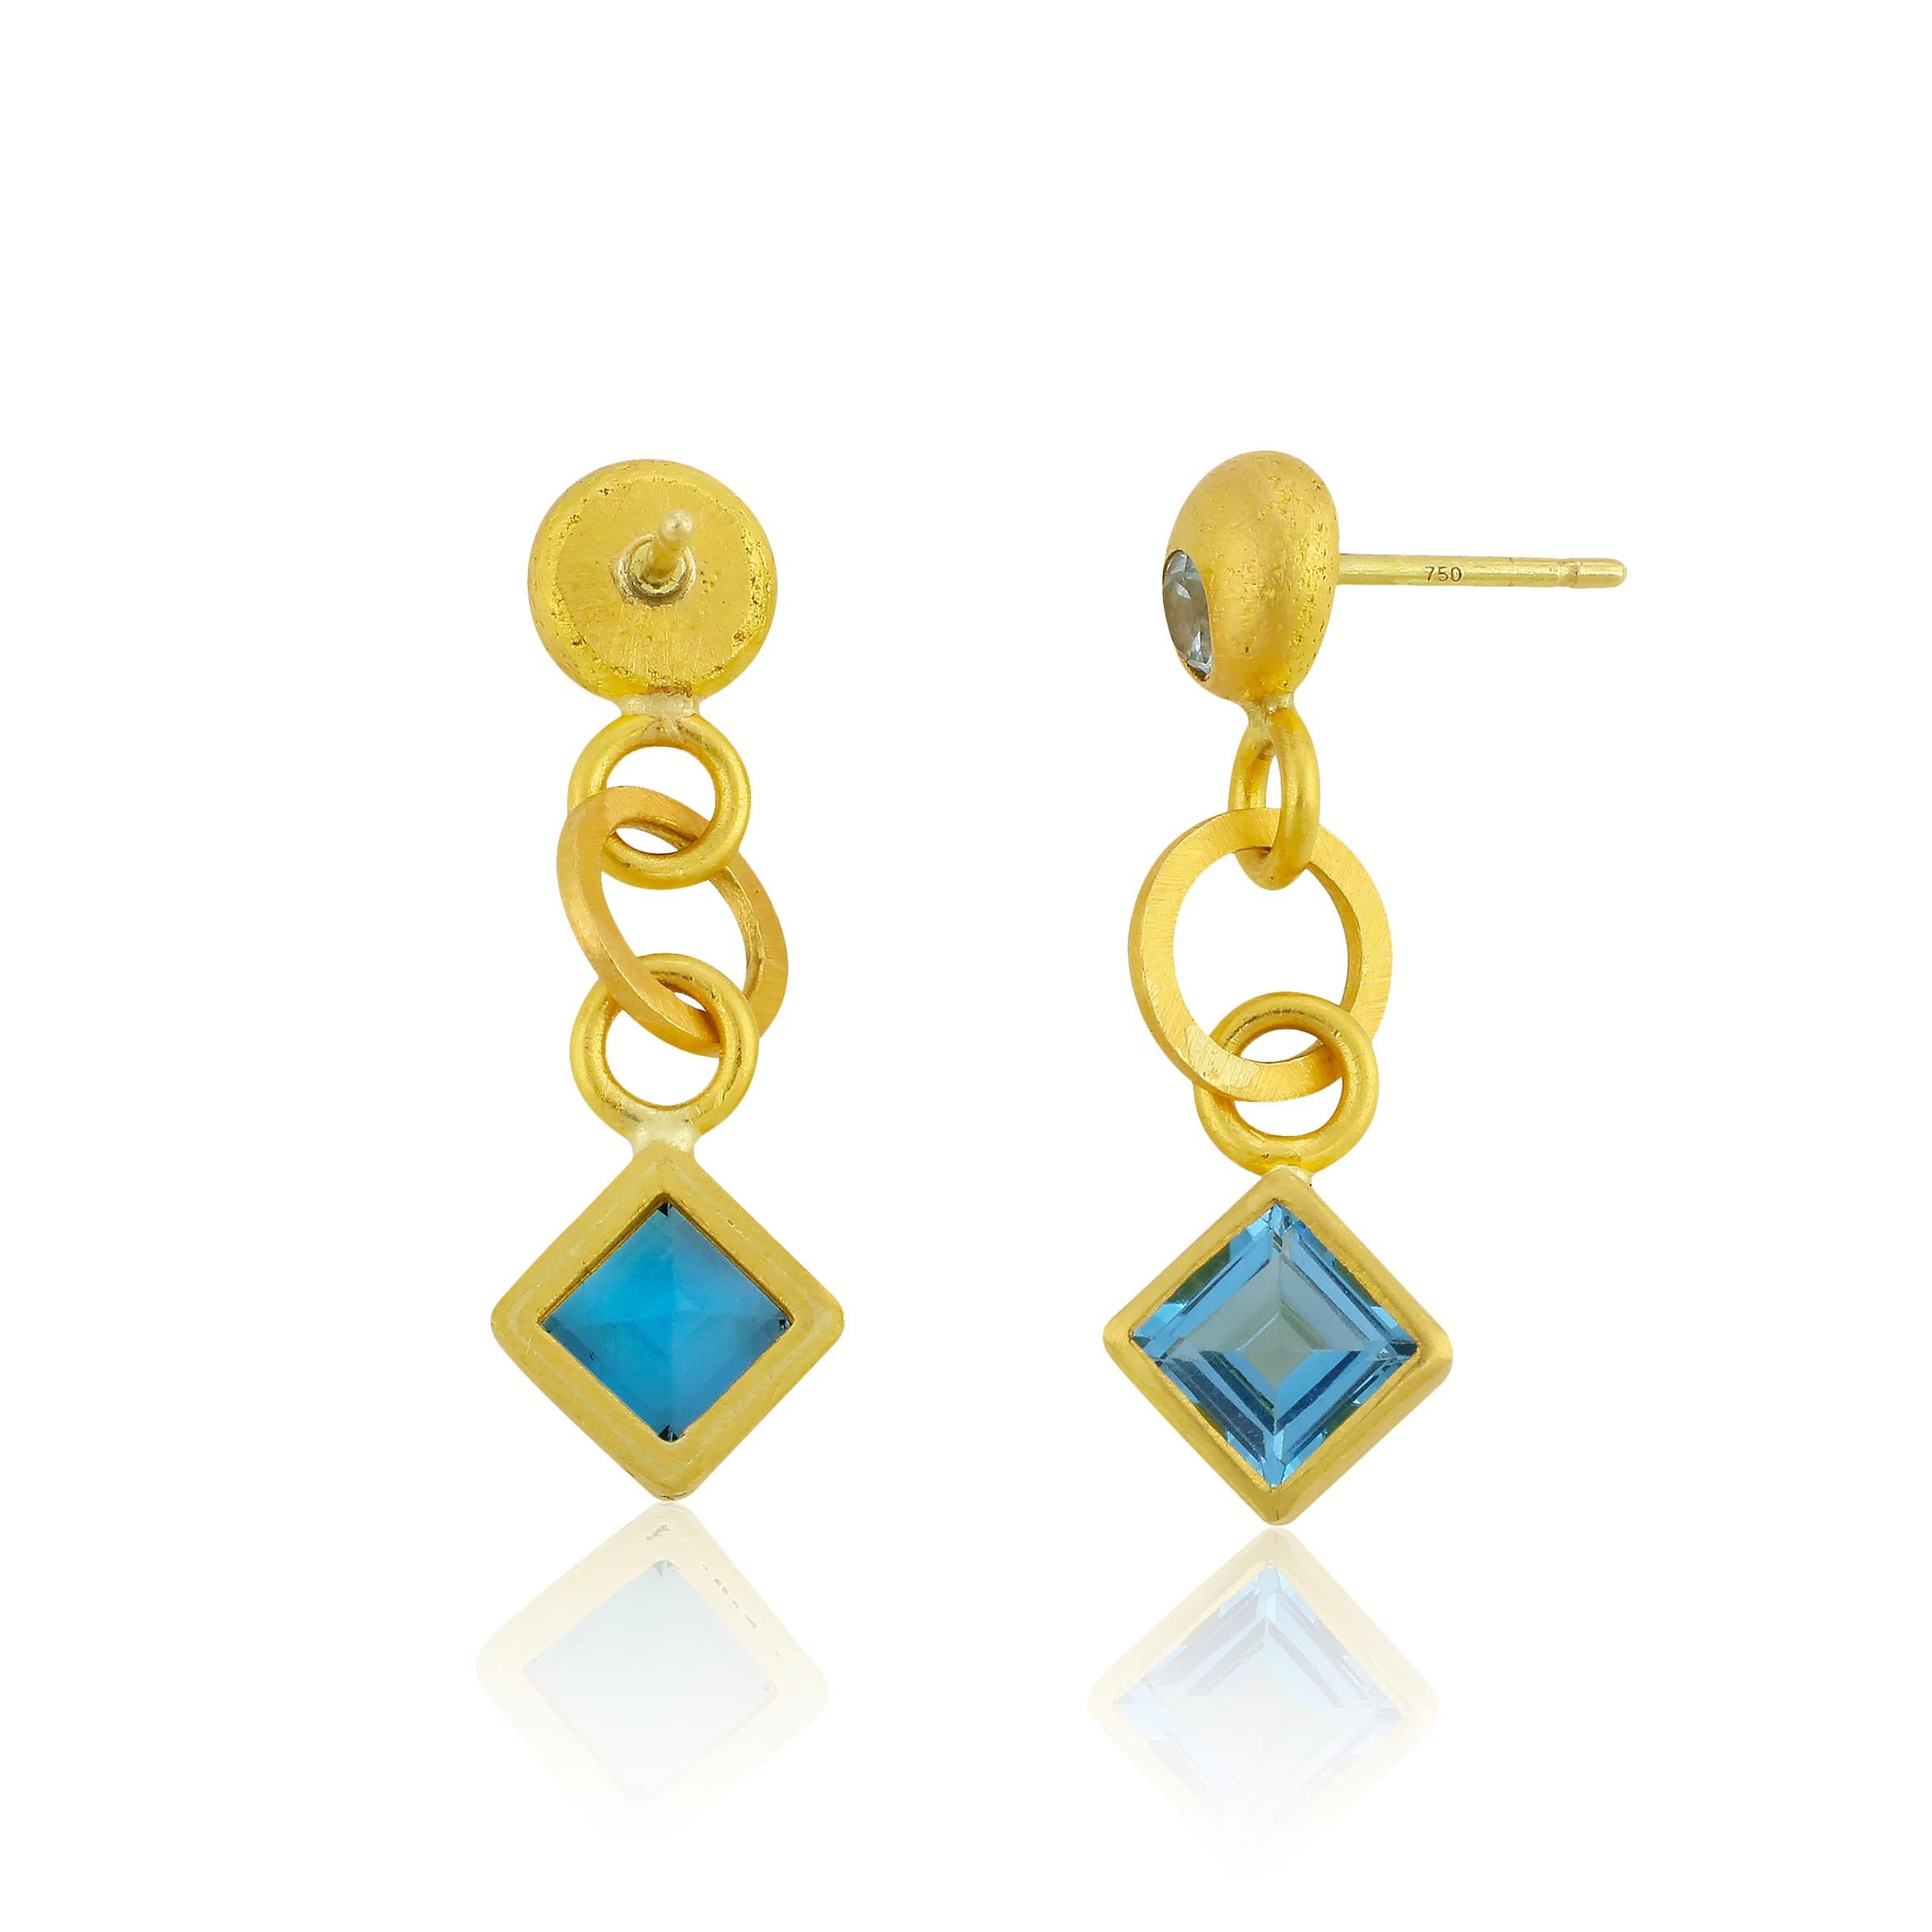 PHILIPPE SPENCER - 2.87 Ct. Total Princess Cut London Blue Topaz, and .35 Ct. Total Round Aquamarine Dangling Statement Earrings. Blue Topaz set in backless Pure 22K Gold with Solid 20K Gold Connection Links & Features. 18K Post Back & Friction Nut